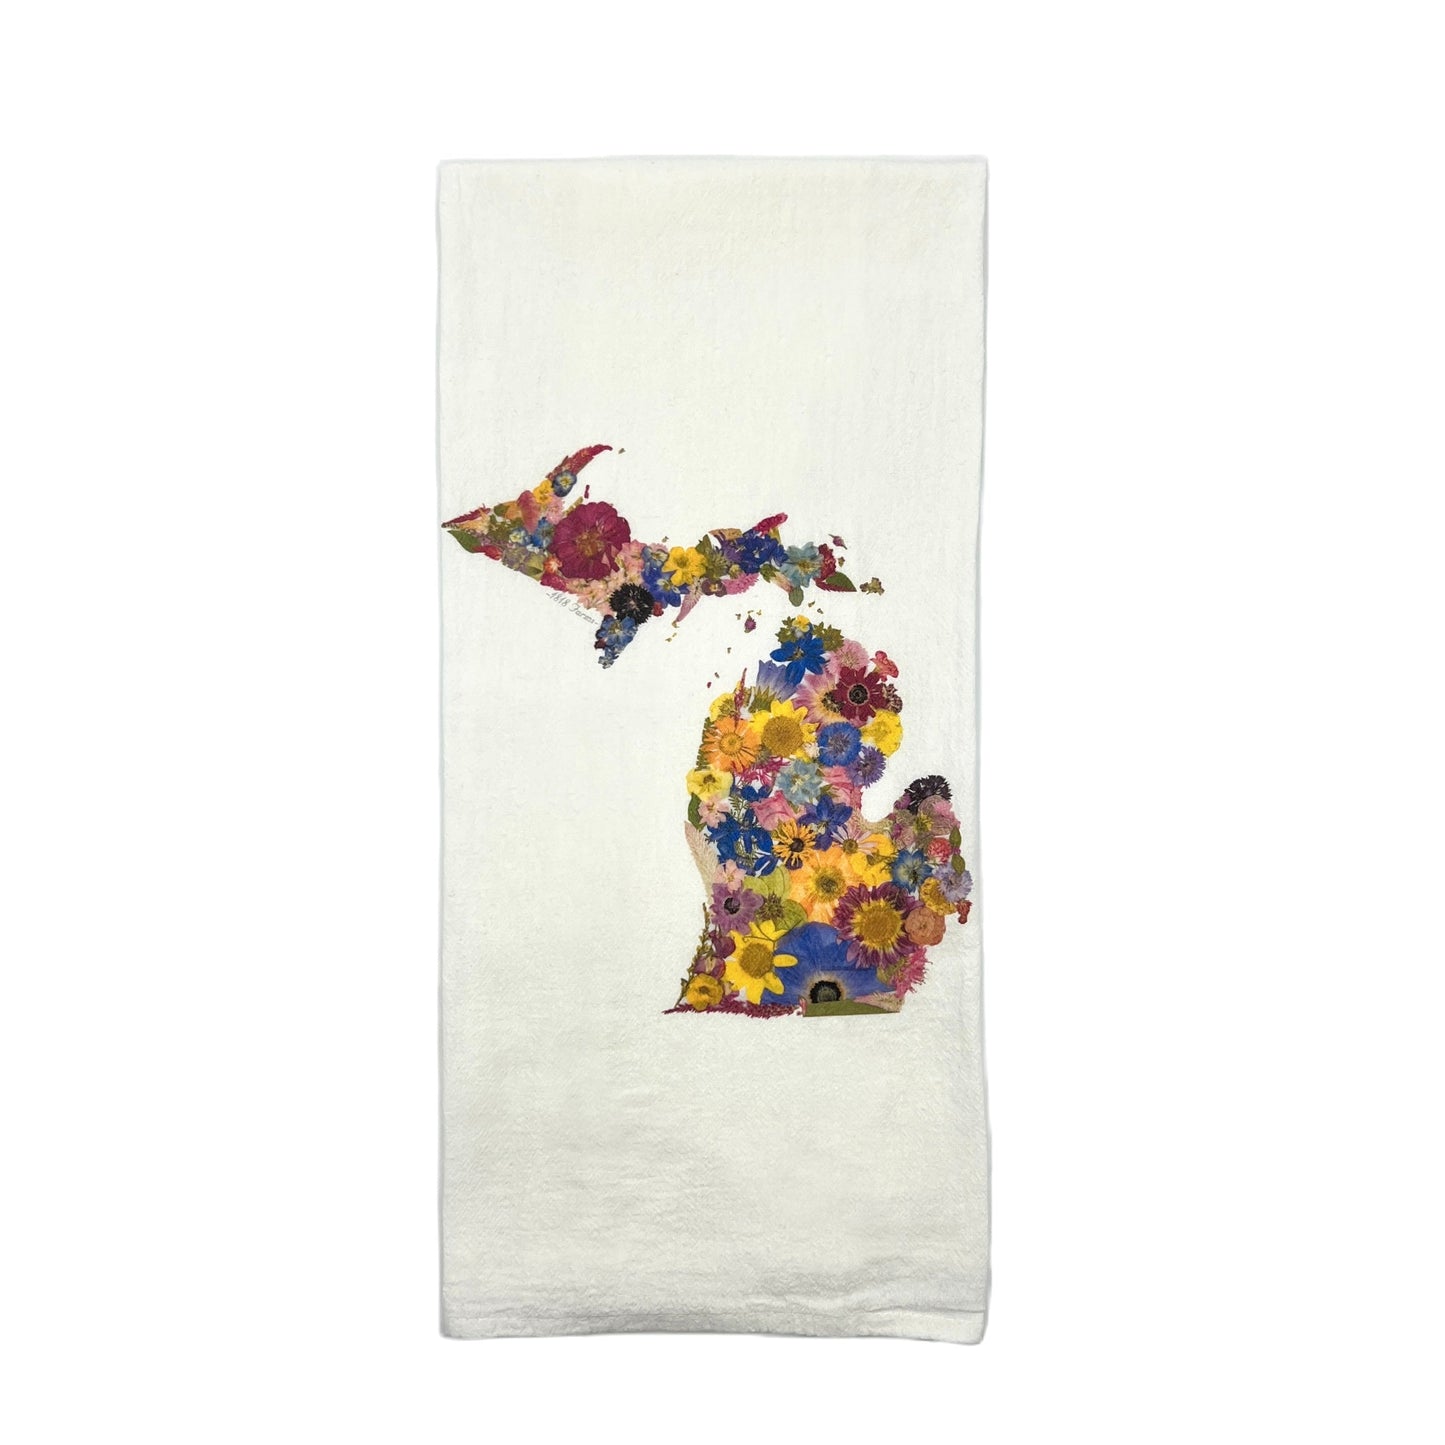 State Themed Flour Sack Towel  - "Where I Bloom" Collection Towel 1818 Farms Michigan  